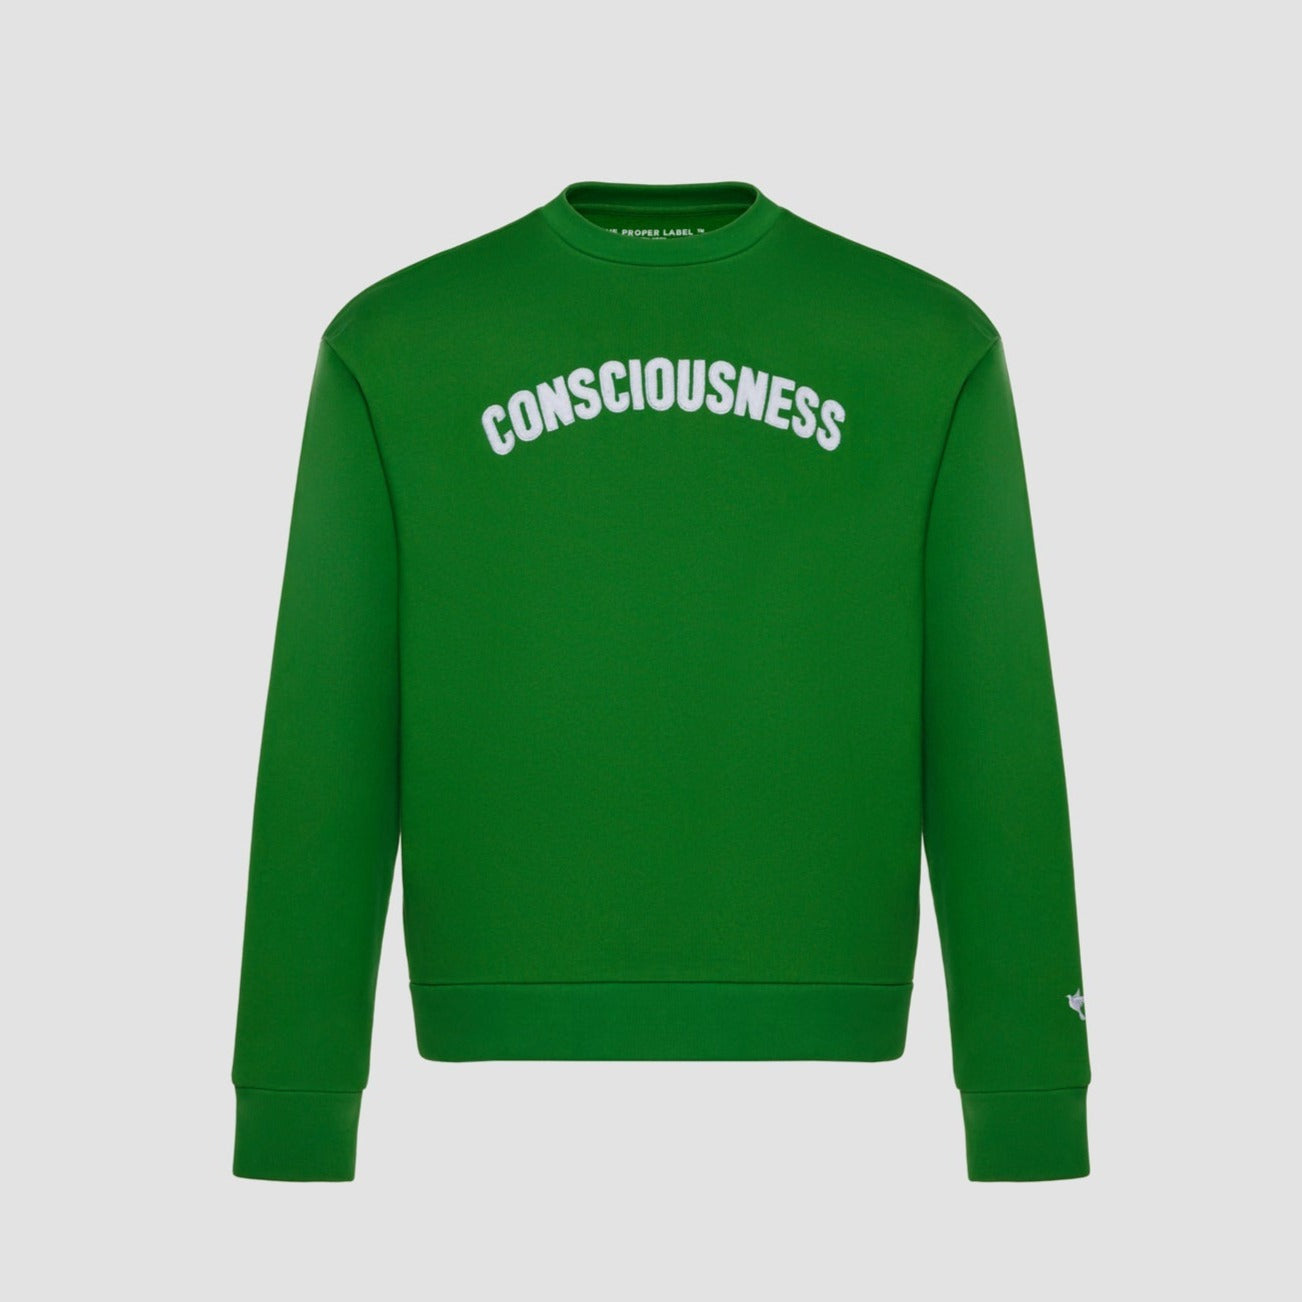 BY TPL ® Consciousness Crewneck Green - The Proper Label ™